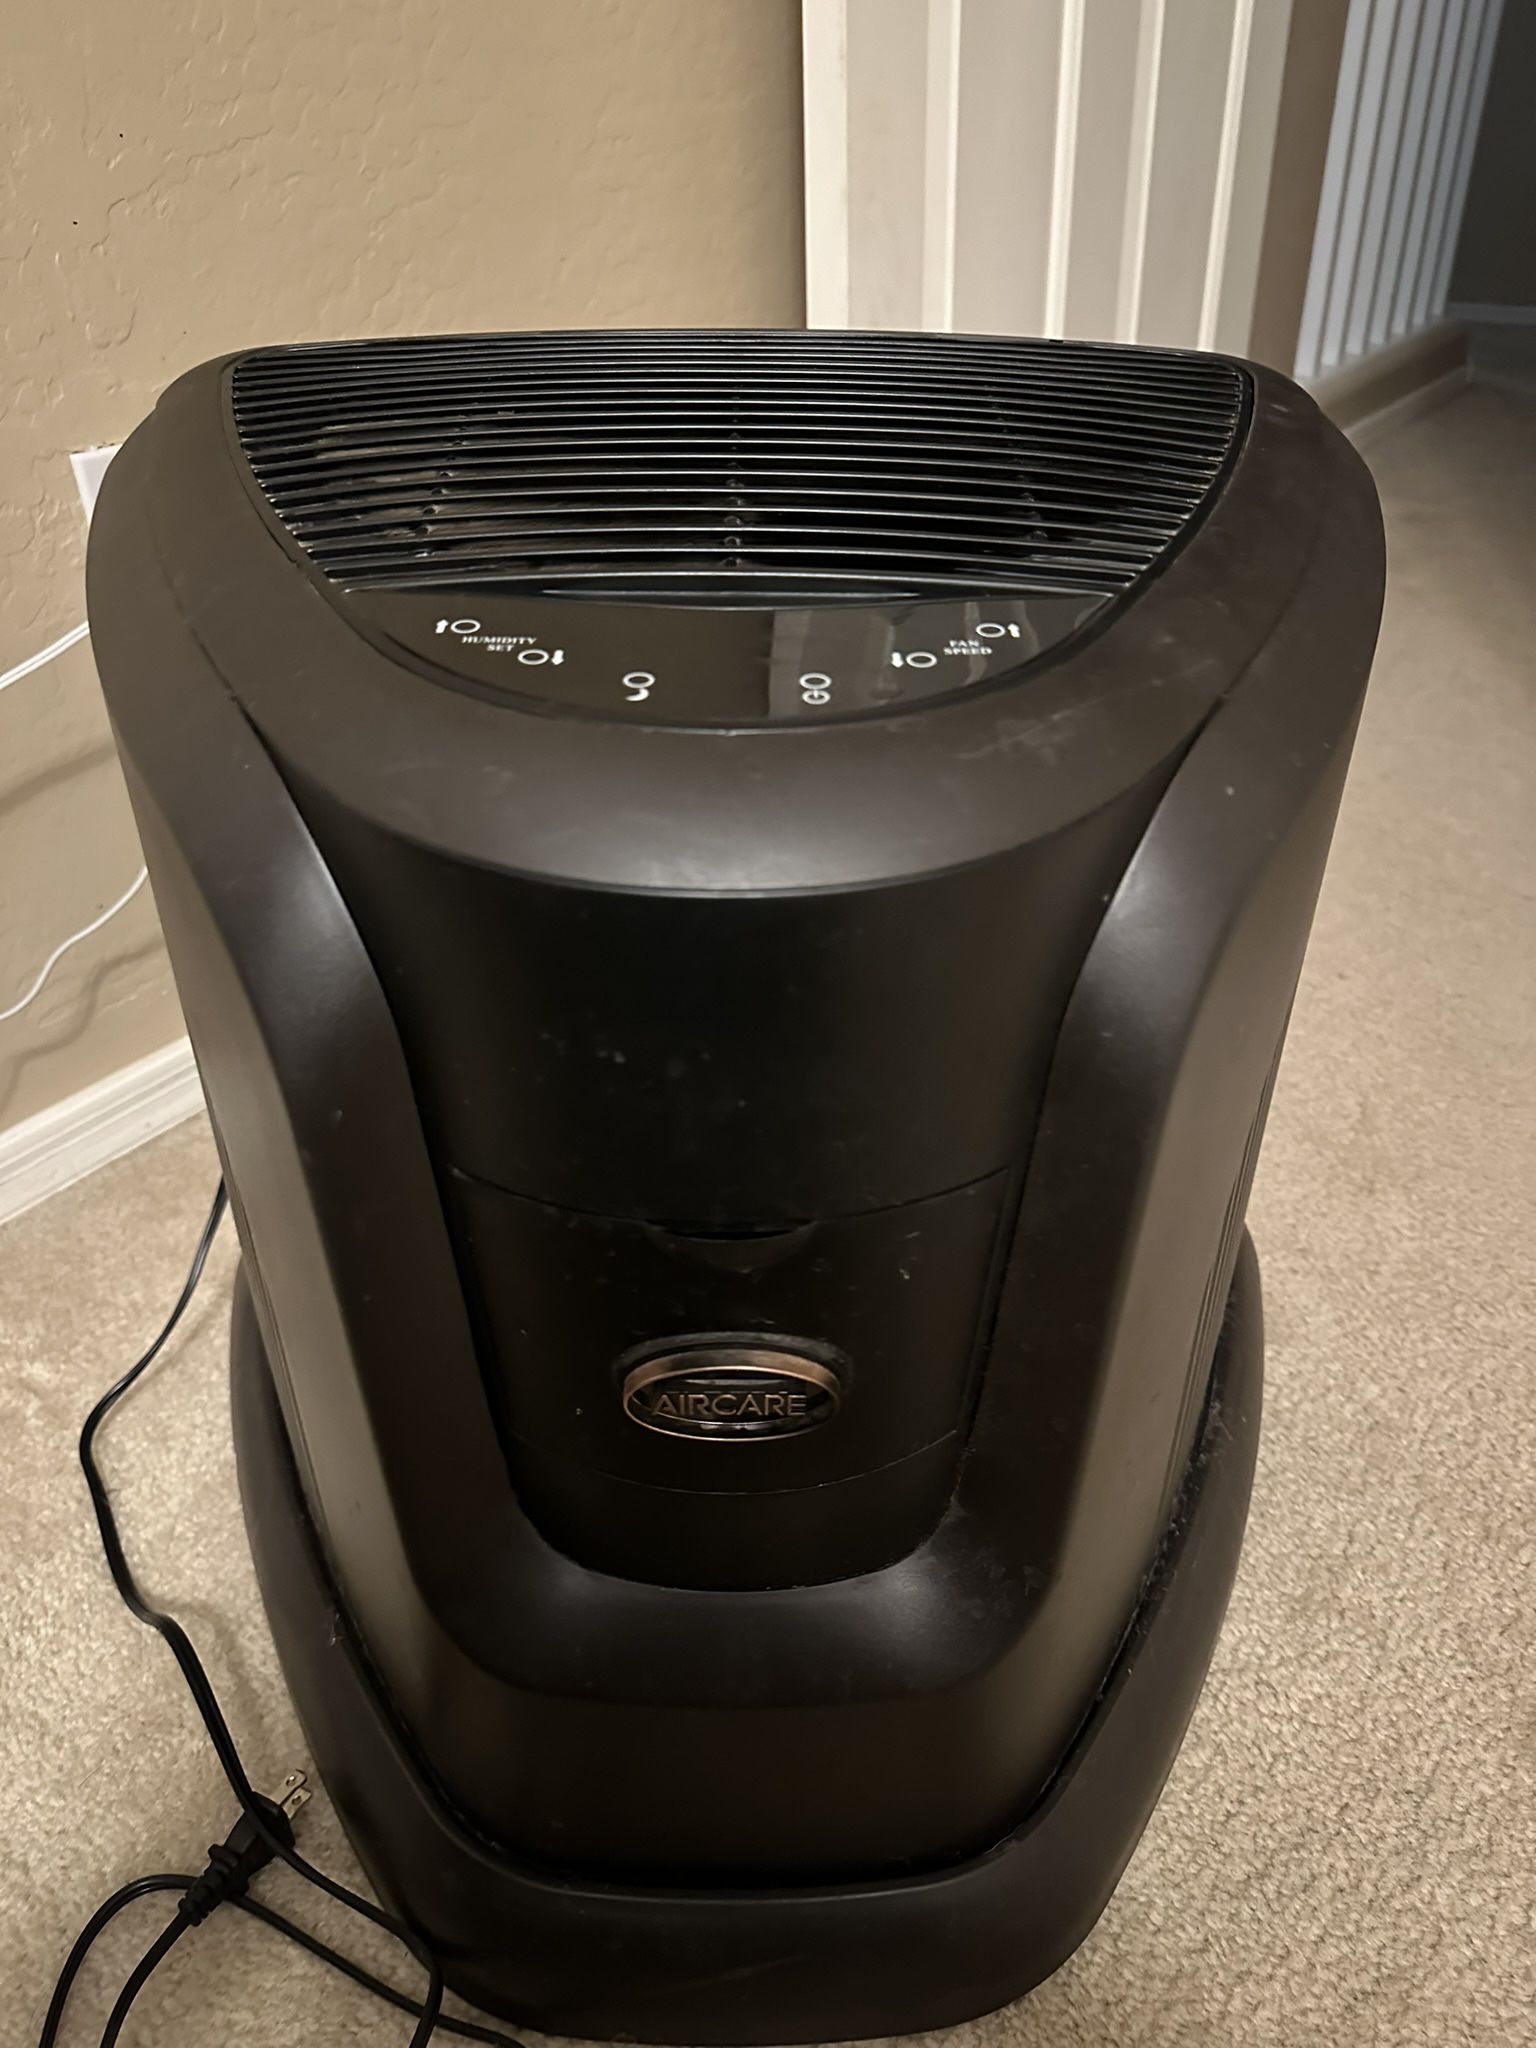 Aircare Home Humidifier for 2400 SQFT